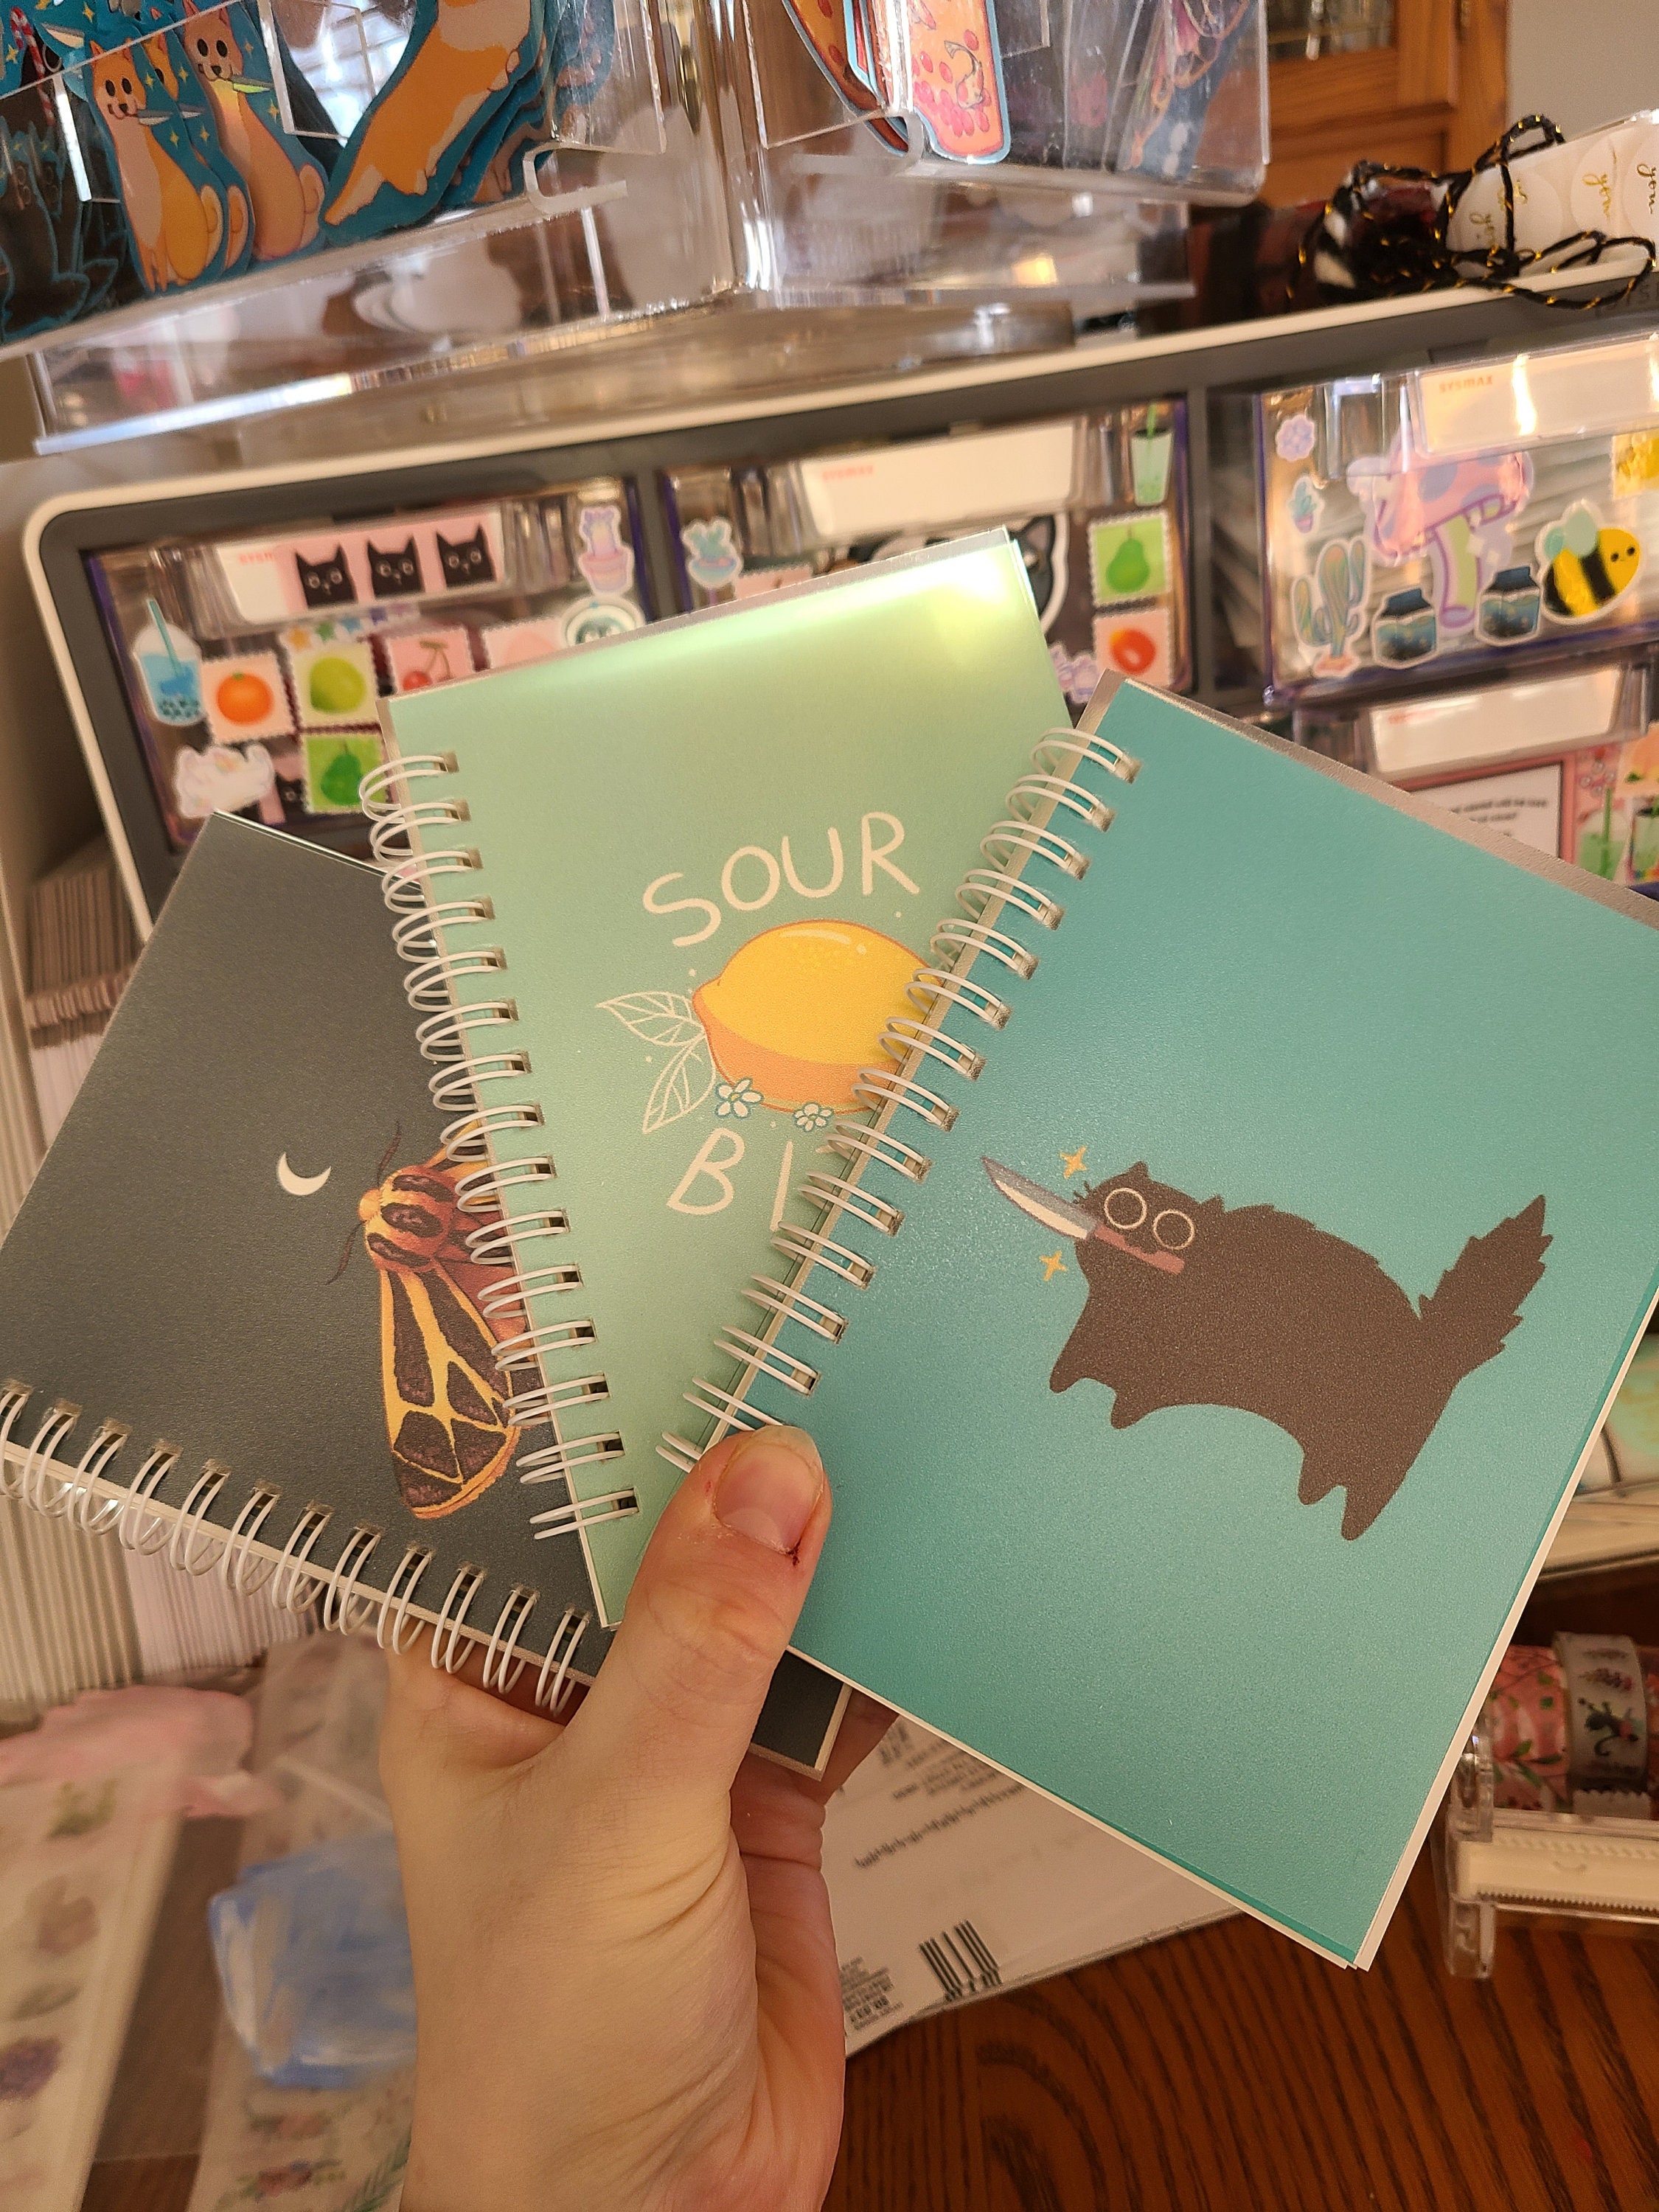 Recipe Book with Cute Cat Spiral Notebook for Sale by AfricanDreams